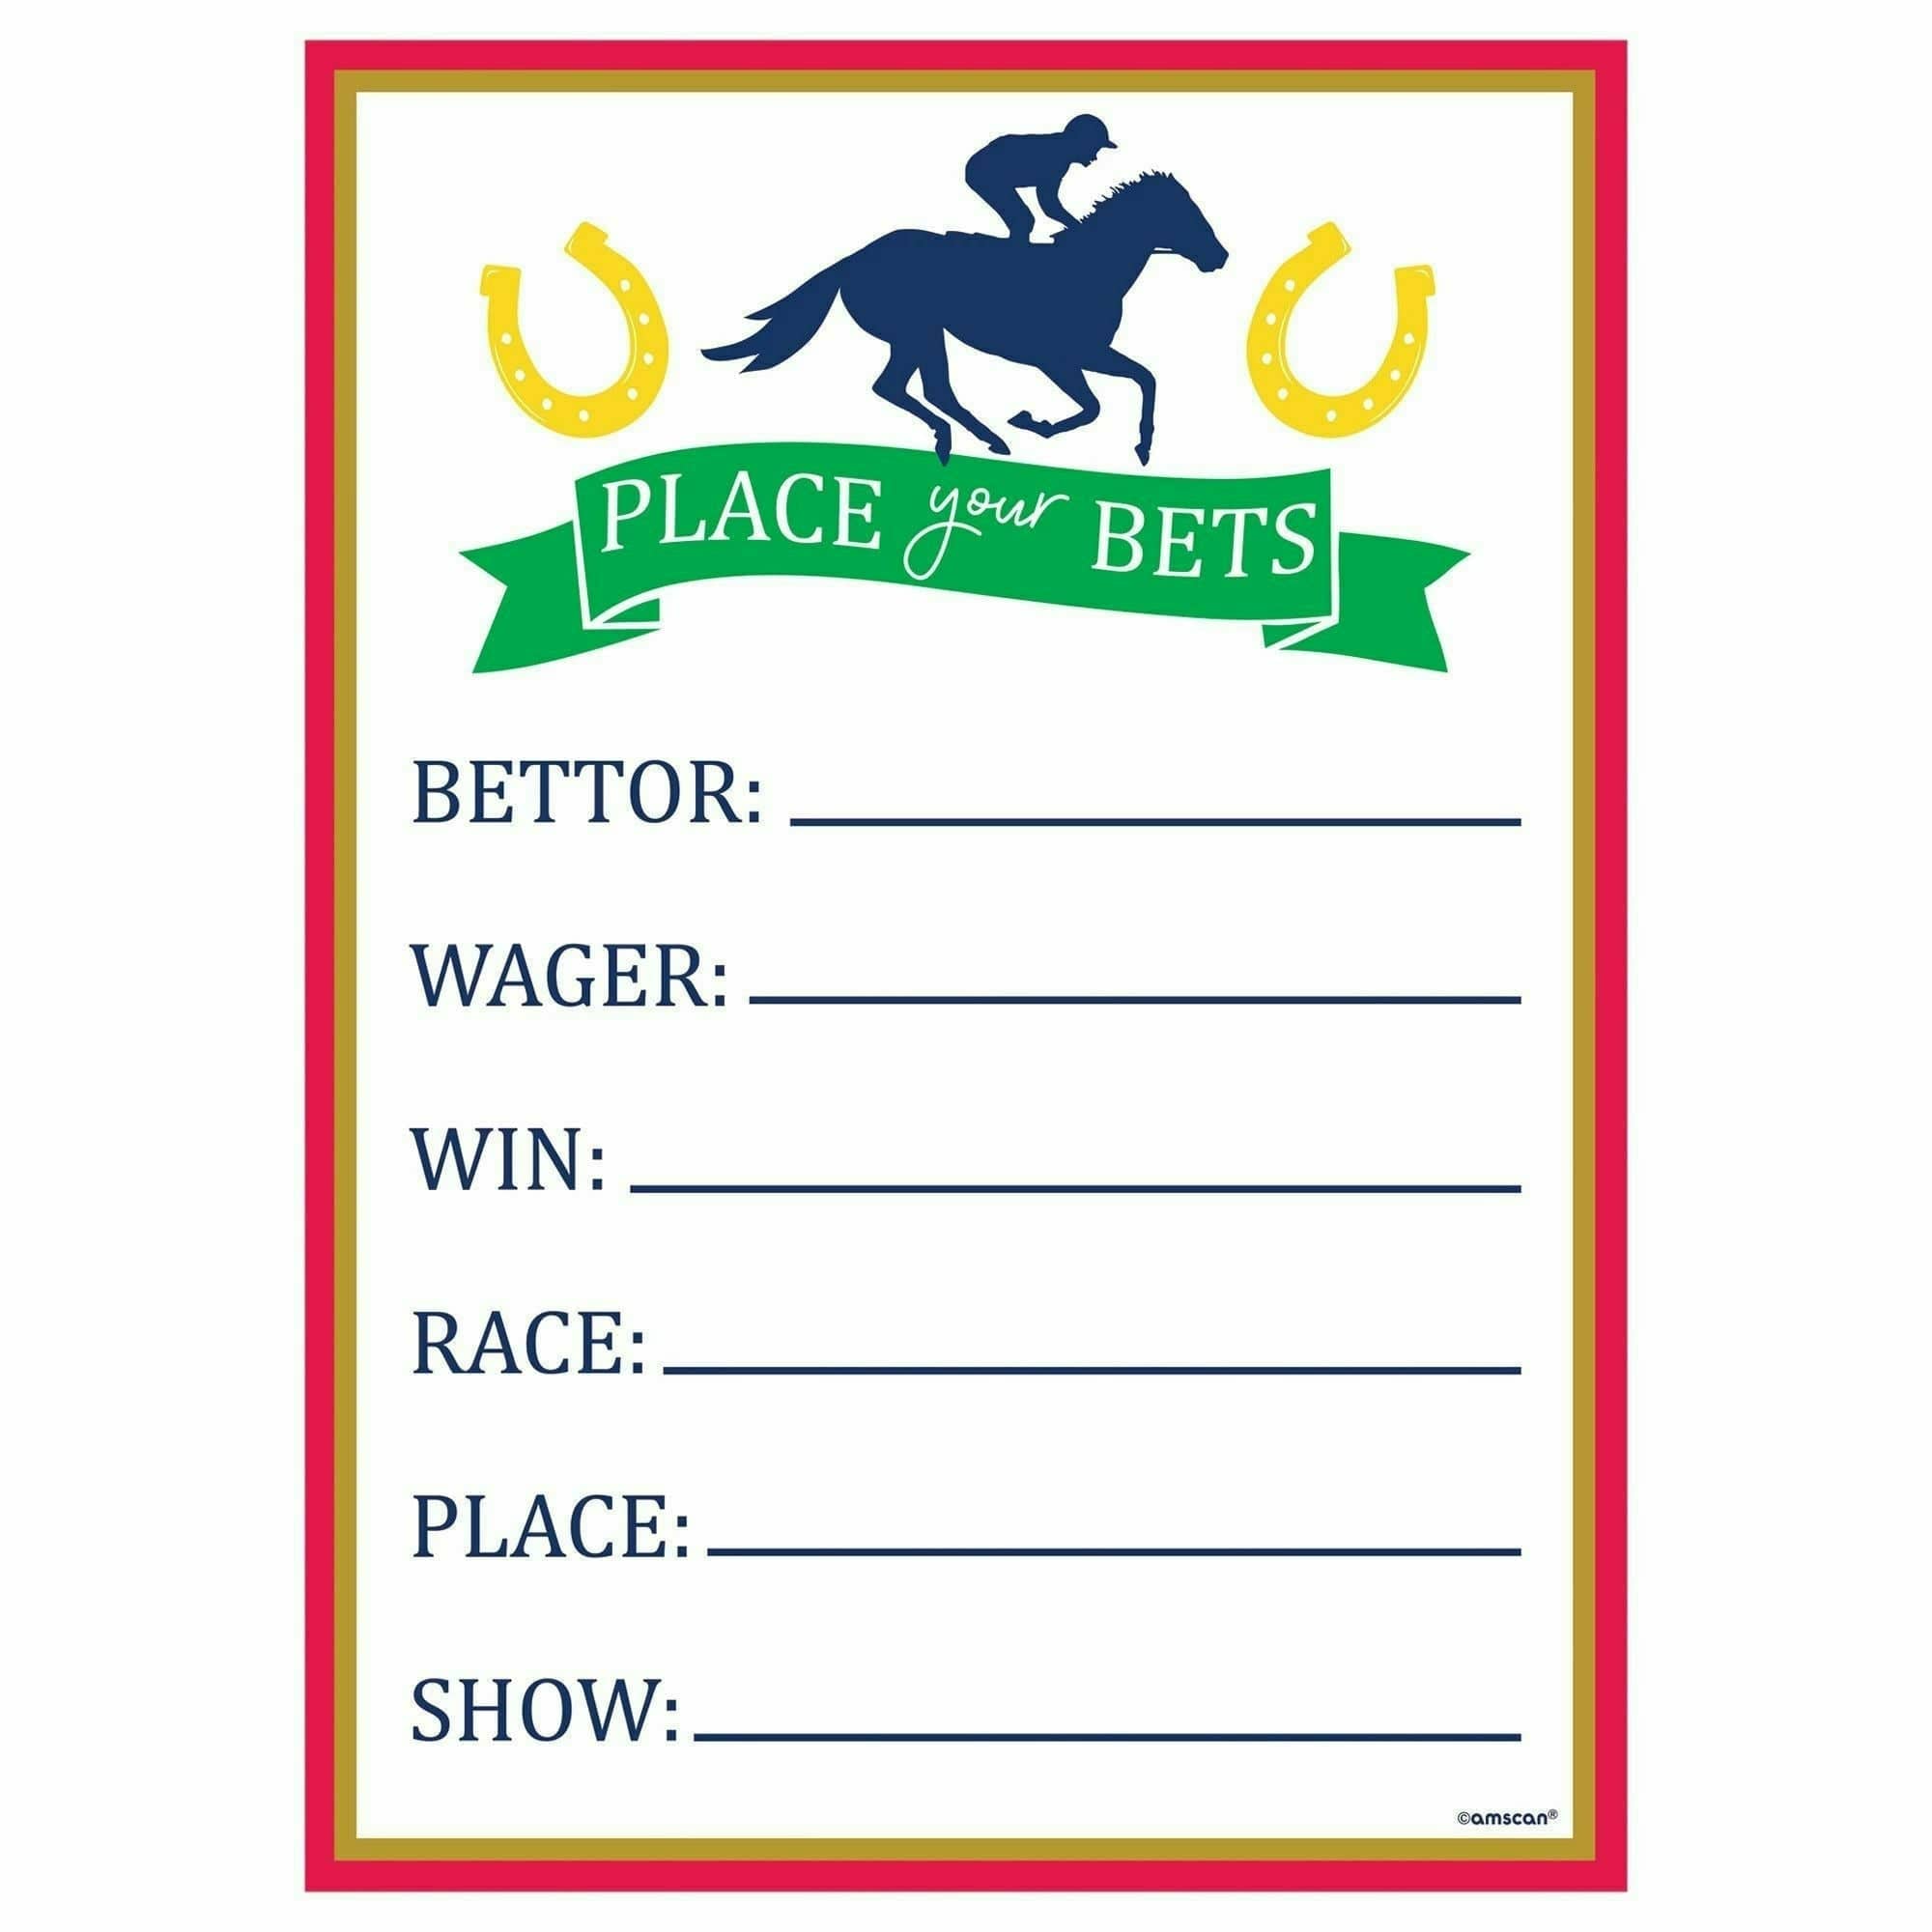 Amscan THEME Kentucky Derby Place Your Bets Game Sheets